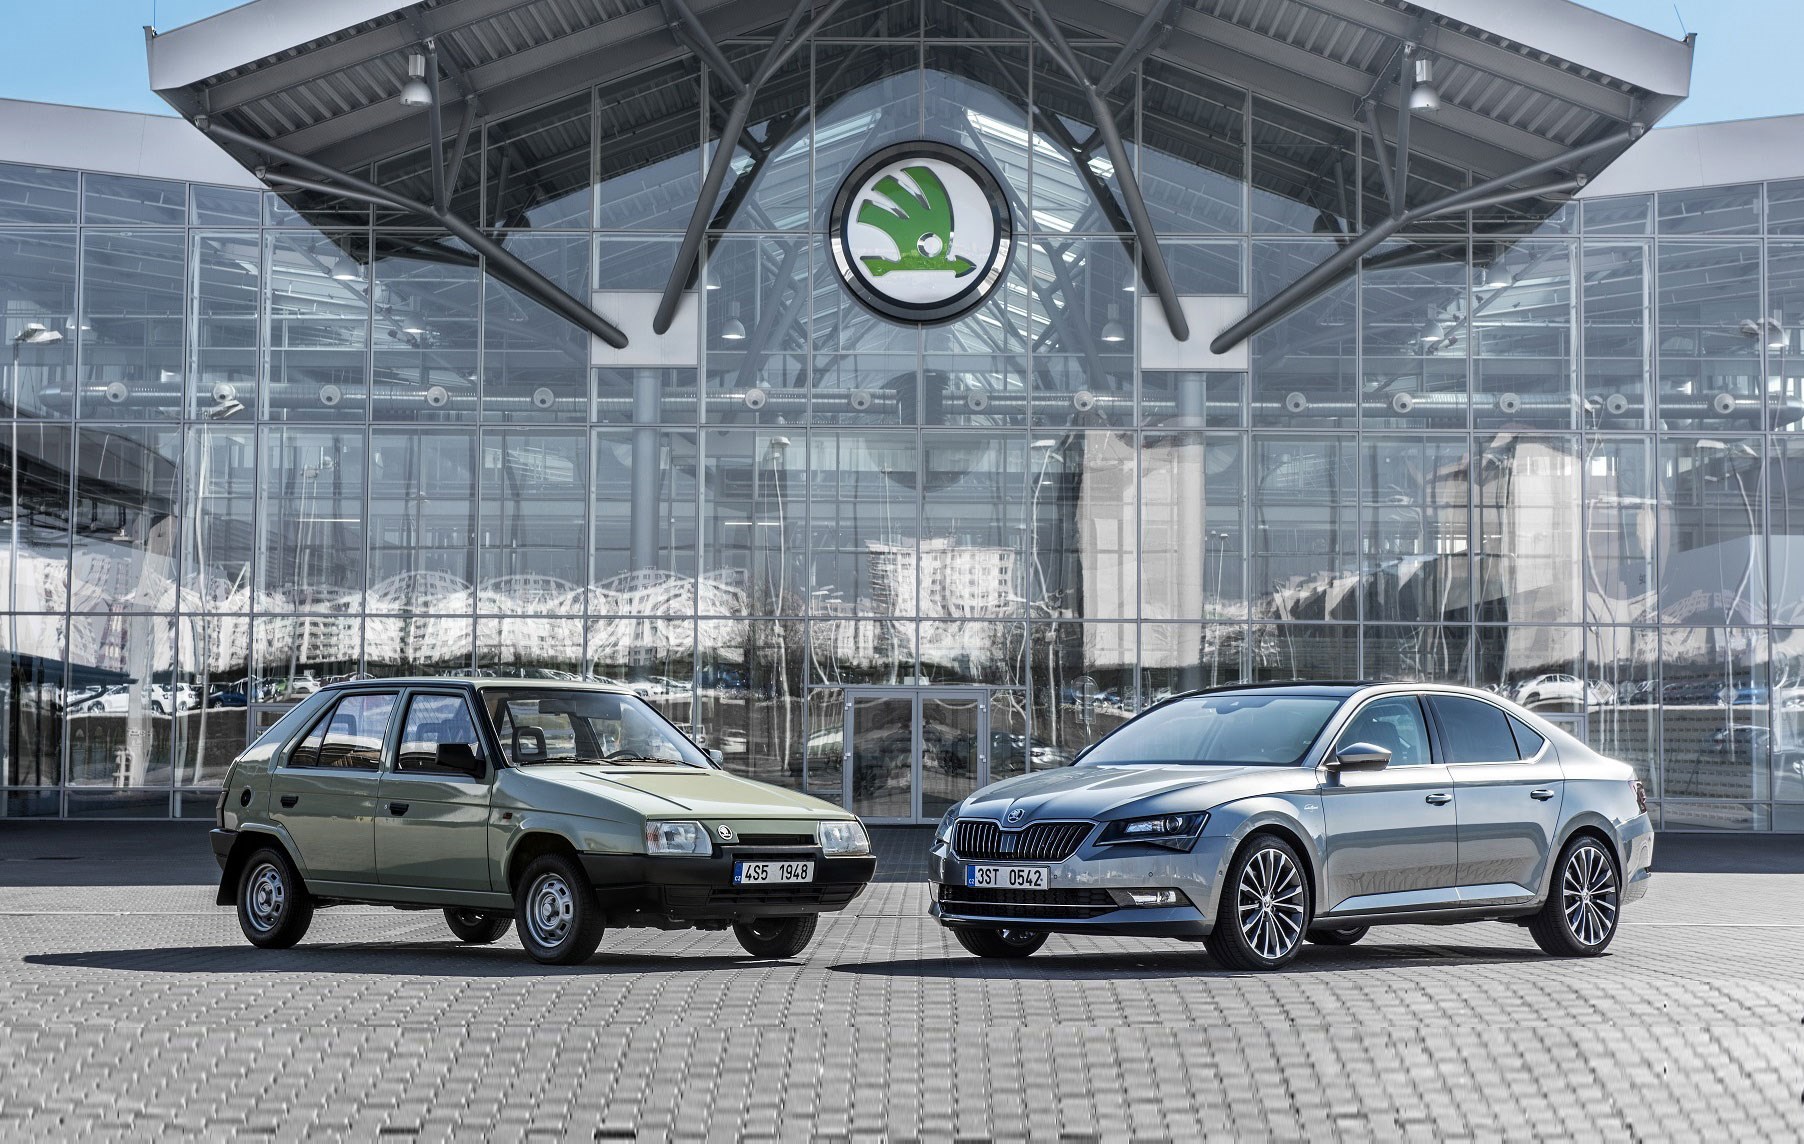 Czech mates – Skoda and VW celebrate 25 years together